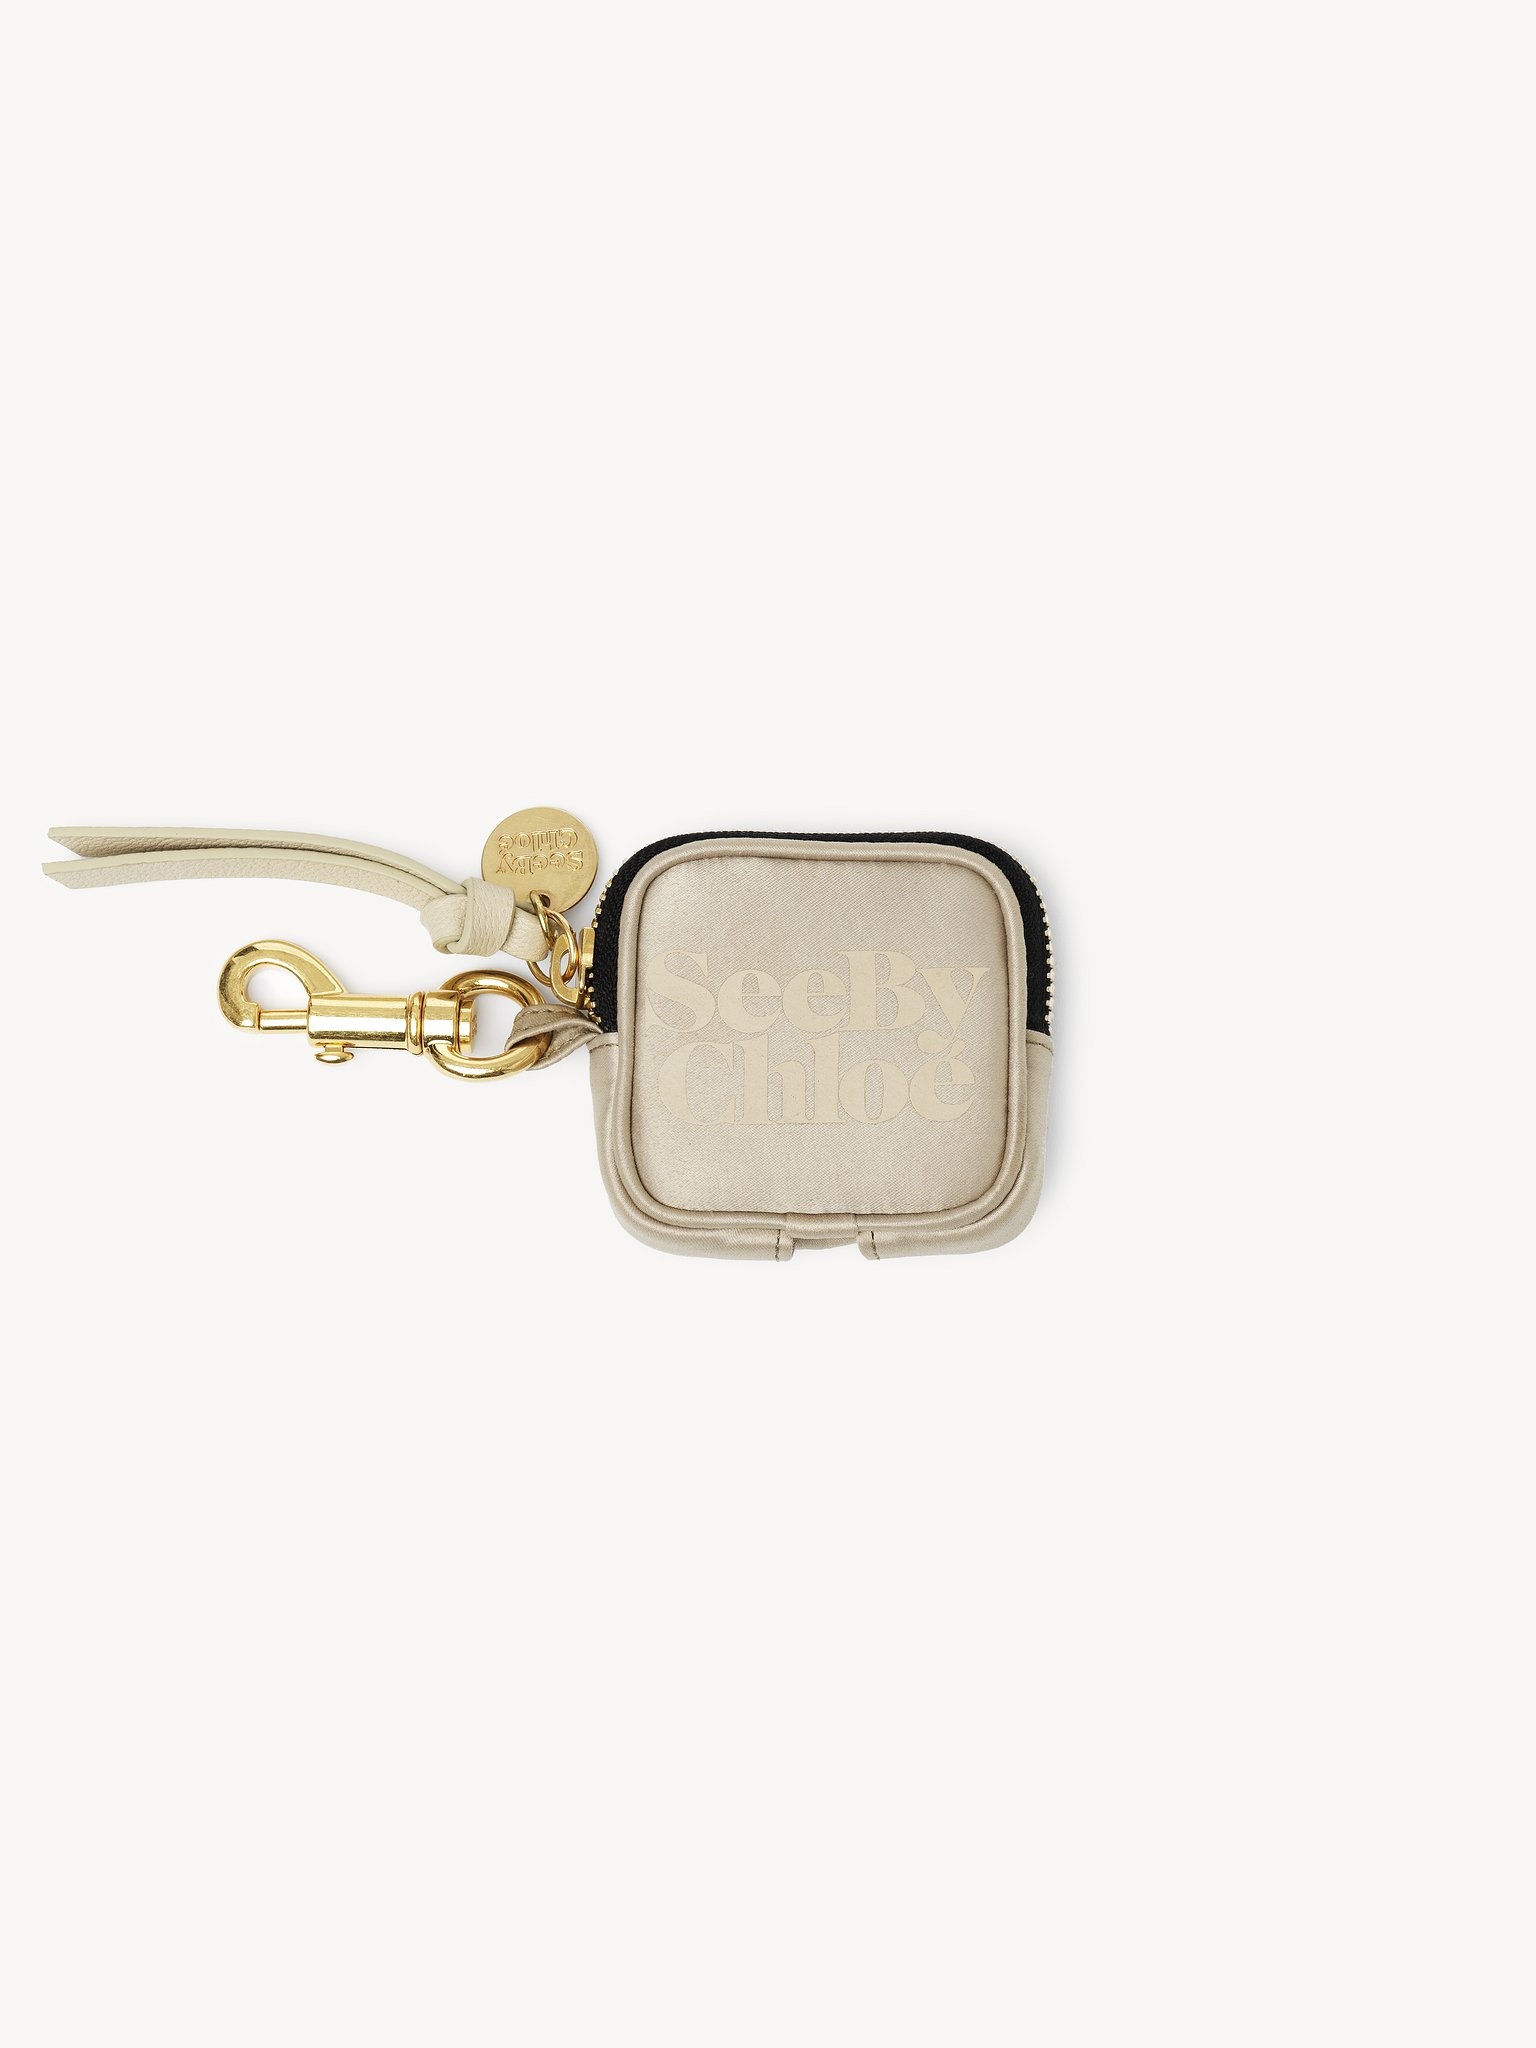 SEE BY CHLOÉ ESSENTIAL AIRPODS CASE - 1